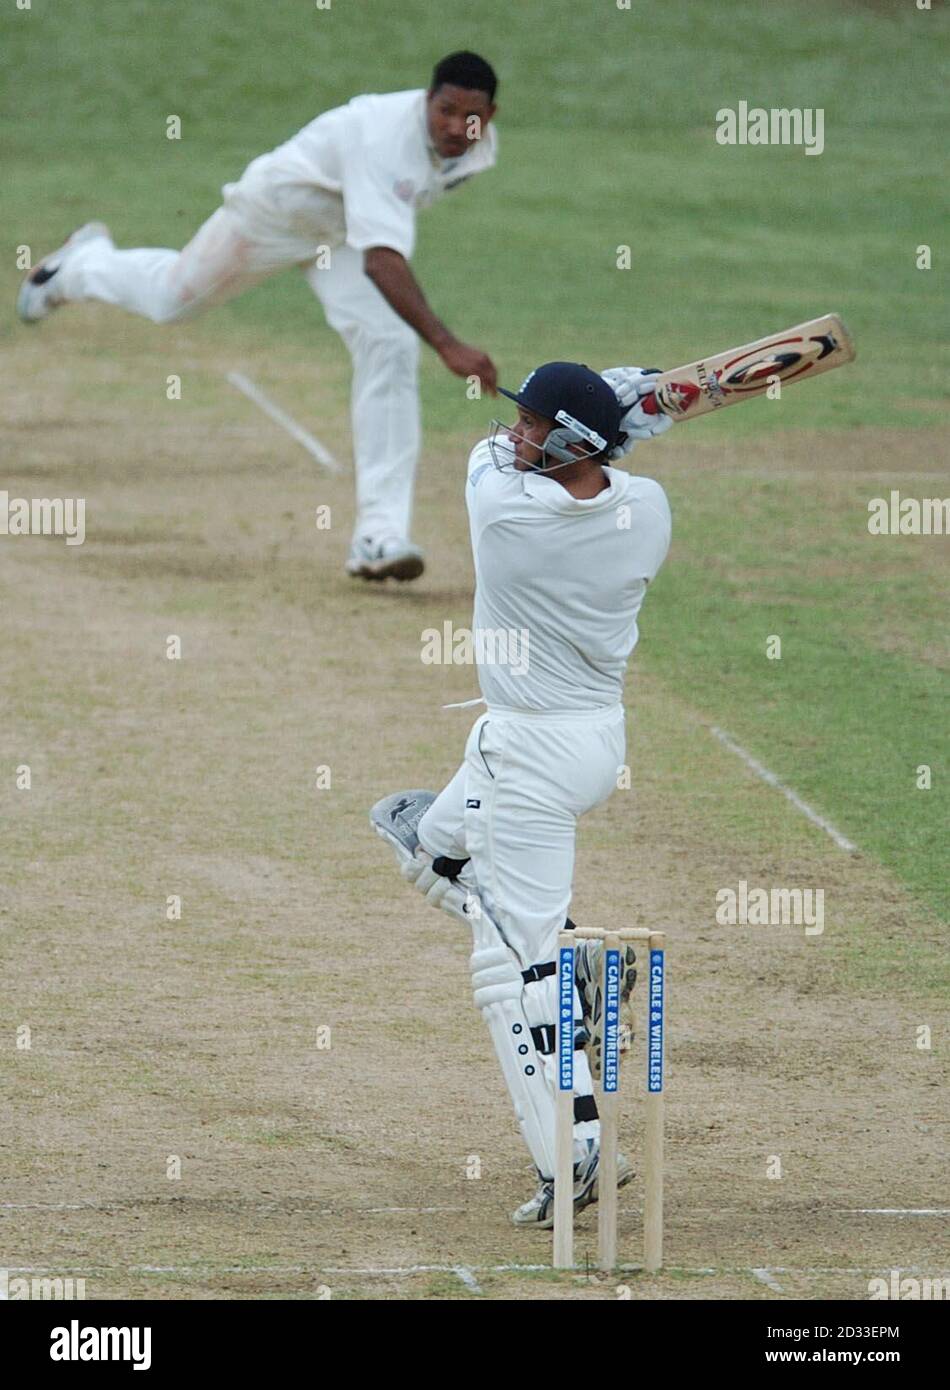 England batsman Mark Butcher hooks the ball for 4 runs off the bowling of West Indian Adam Sanford, during the second day of the second Test match at Port of Spain, Trinidad. Stock Photo